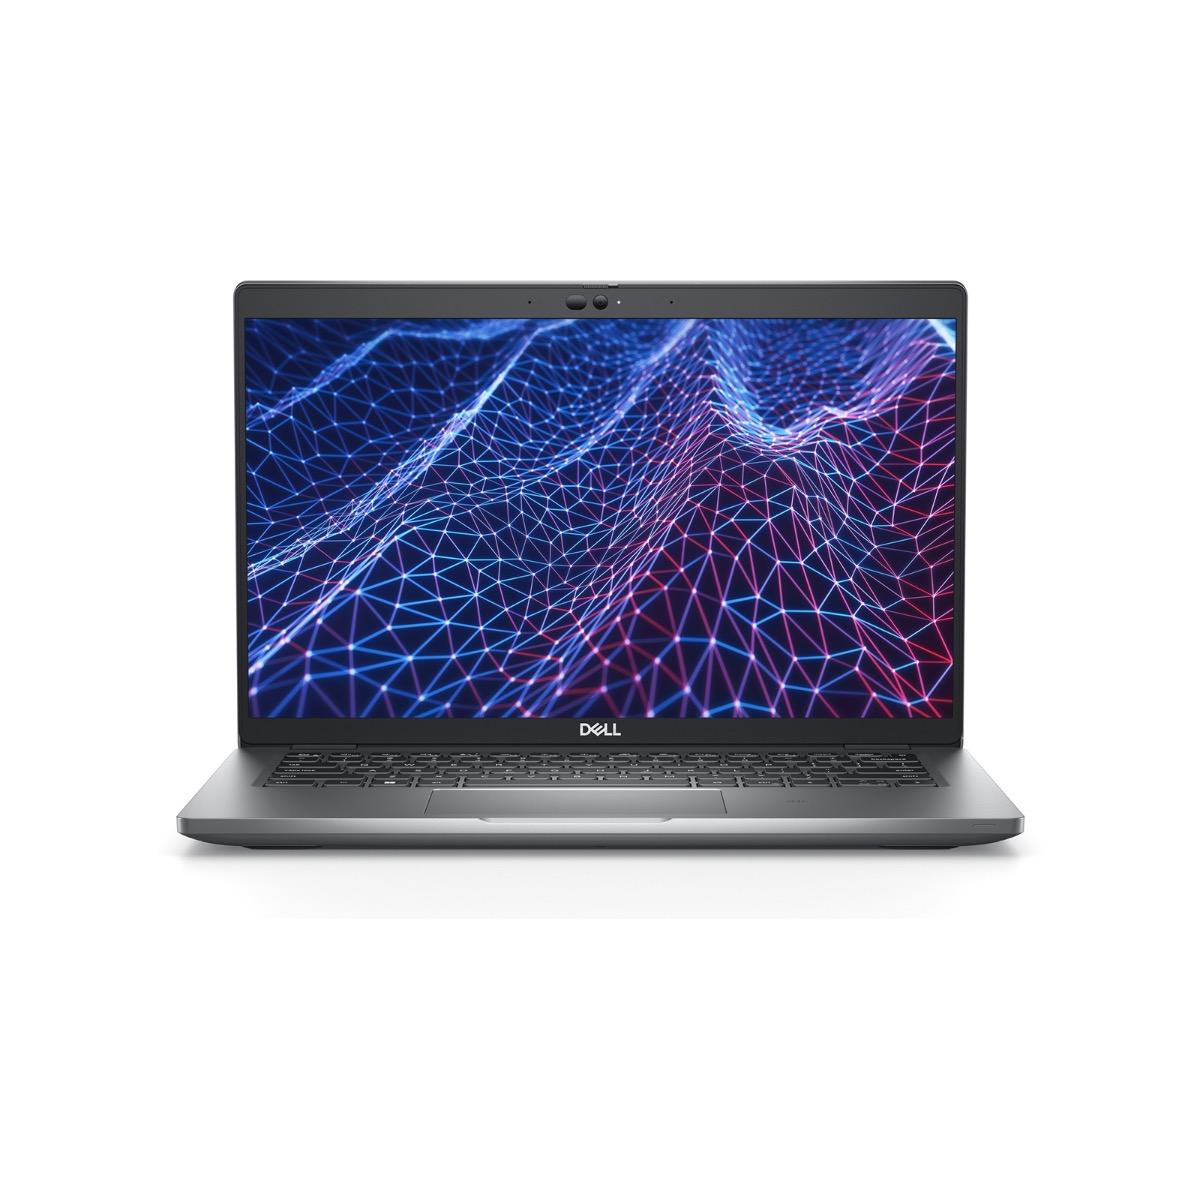 Dell-N057L352015EMEA-4G-Dell-N057L352015EMEA-4G-N057L352015EMEA-4G-Laptops | LaptopSA.co.za a division of the notebook company 